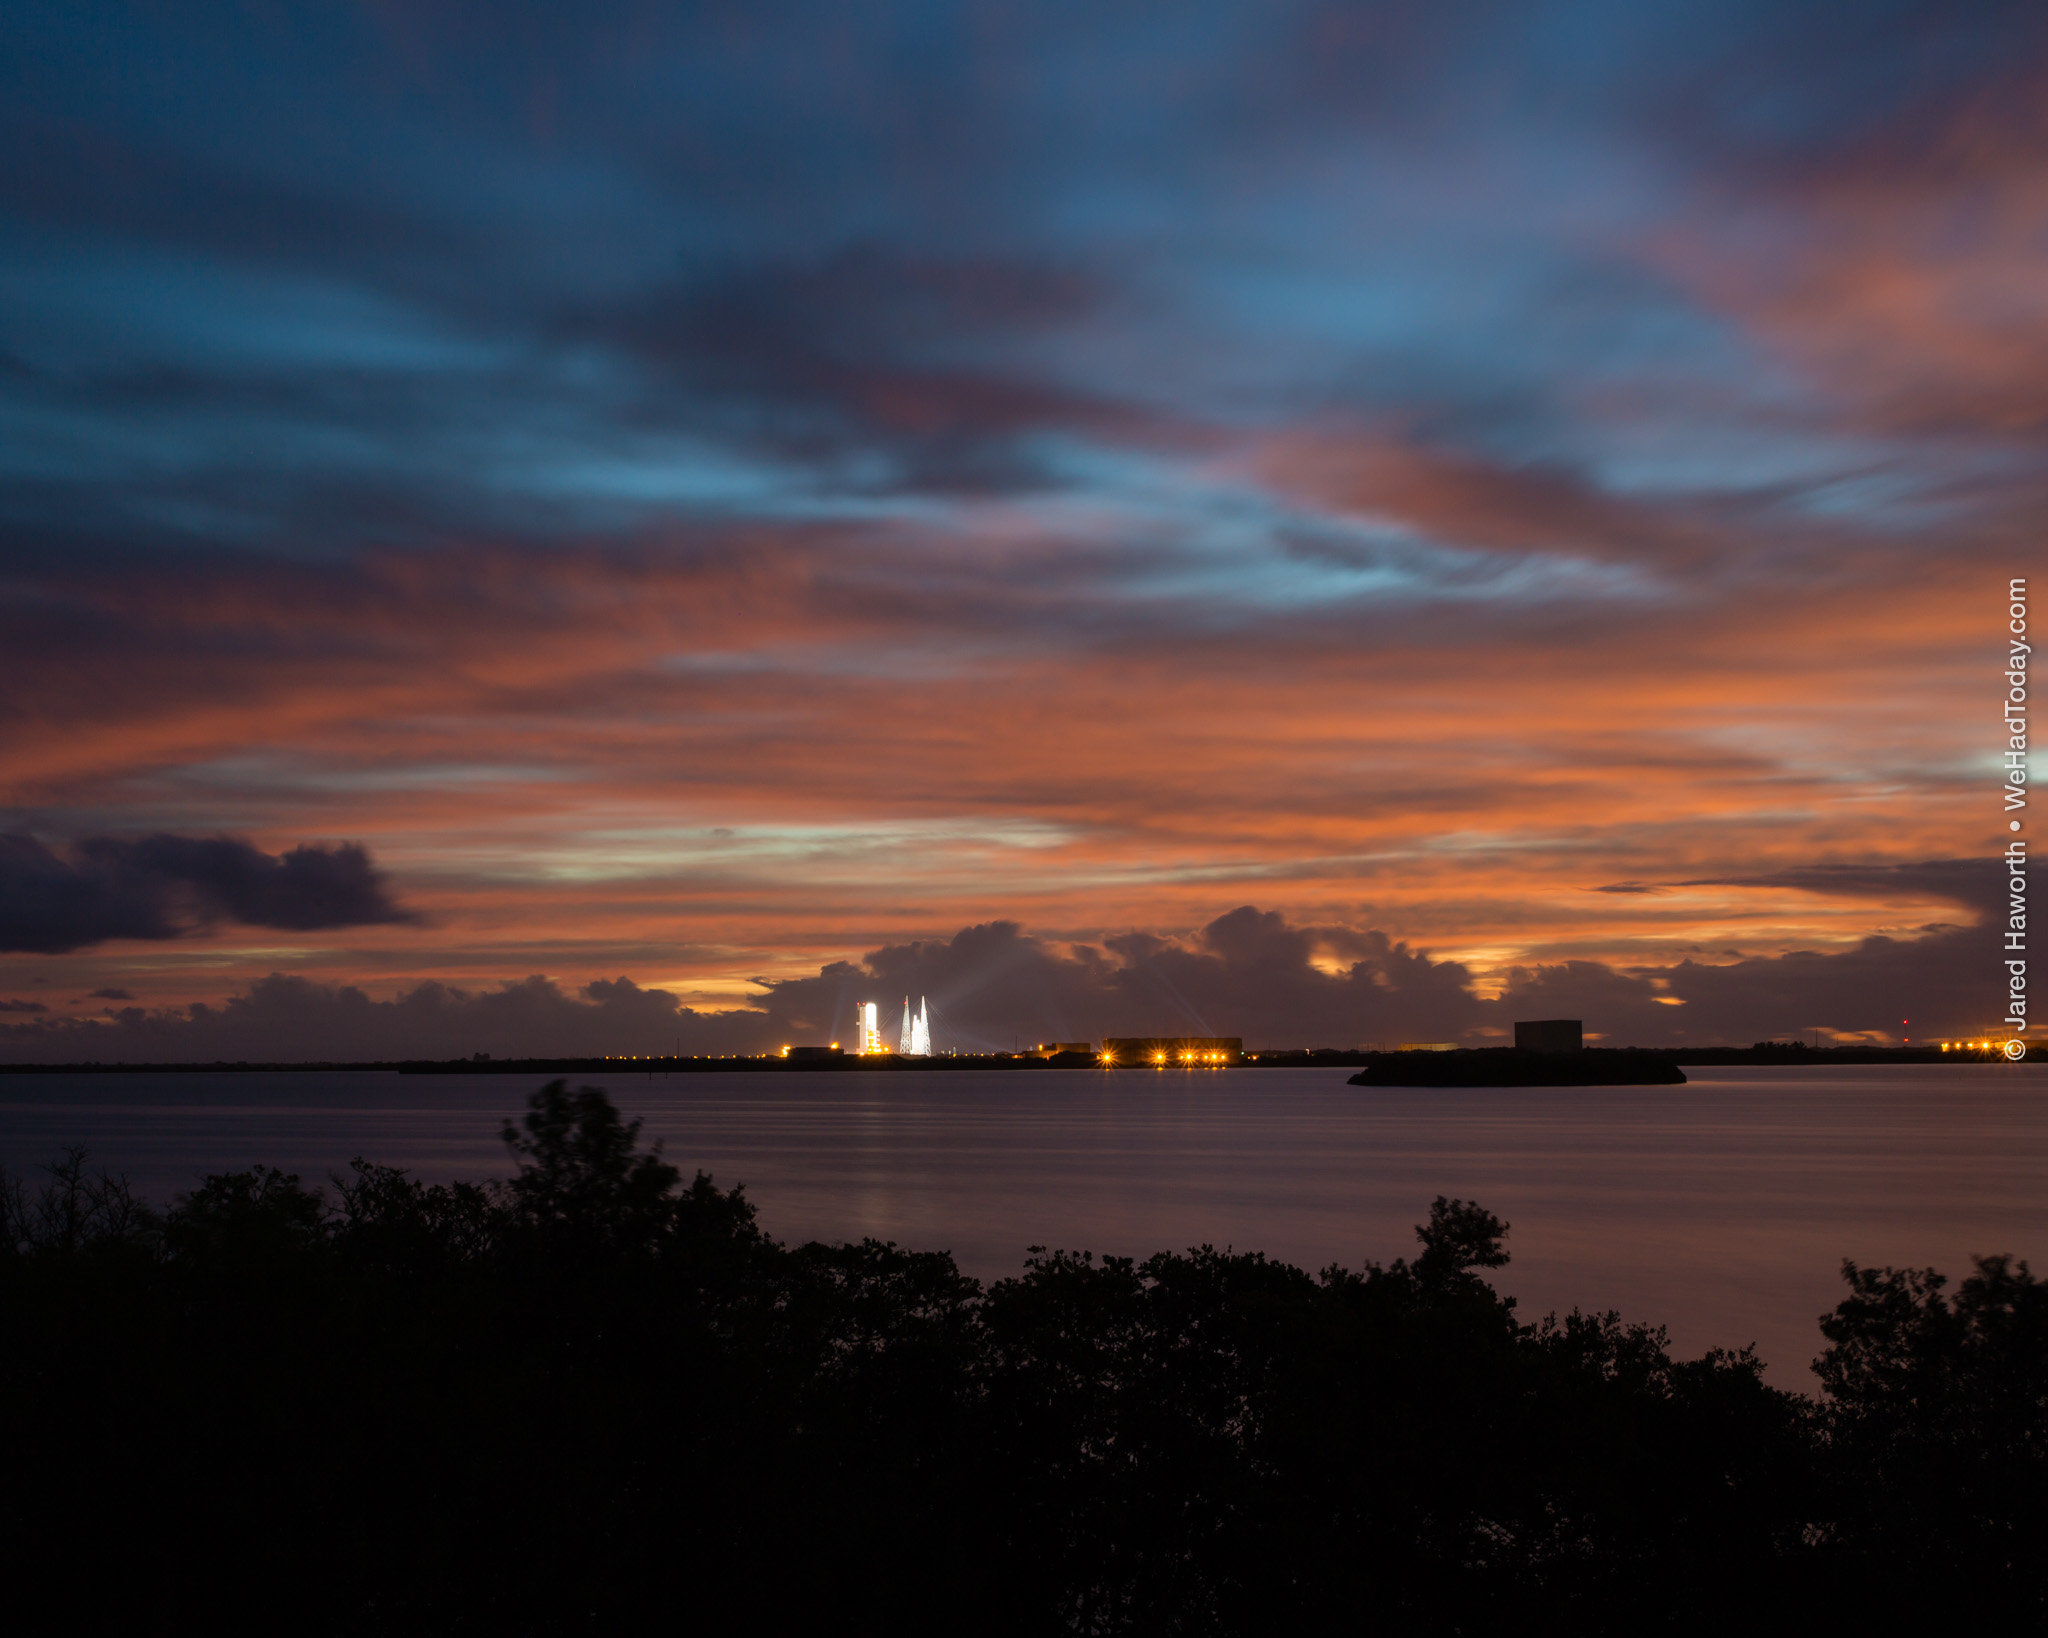 T-90 minutes to launch on December 4 (later scrubbed), the sun is just beginning to rise behind the Delta IV launchpad.